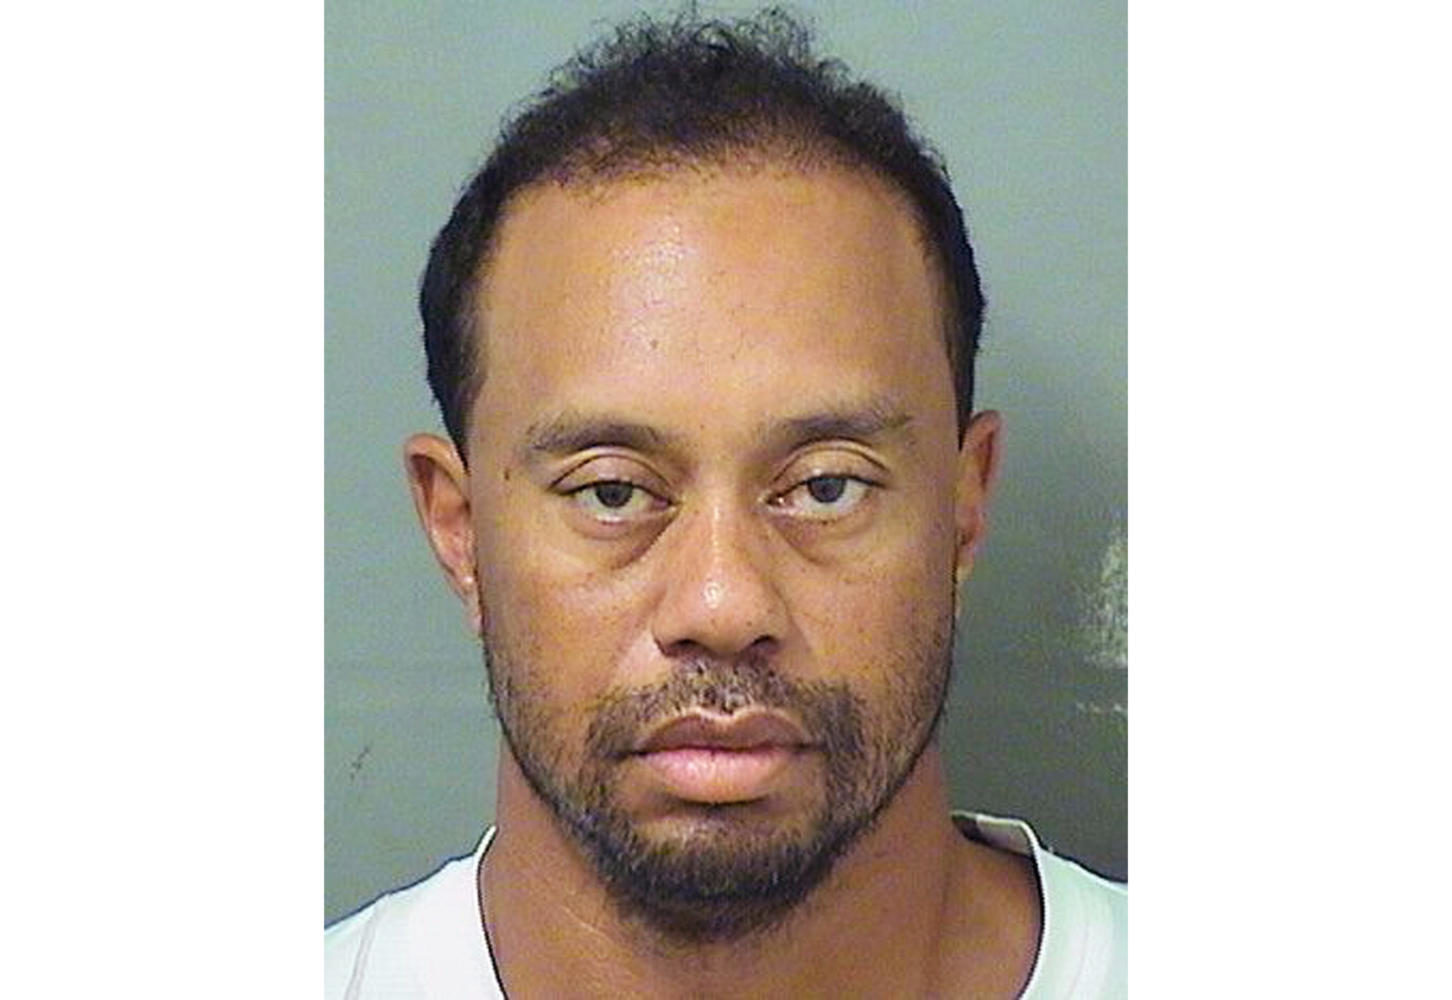 Tiger+Woods+is+charged+with+a+DUI